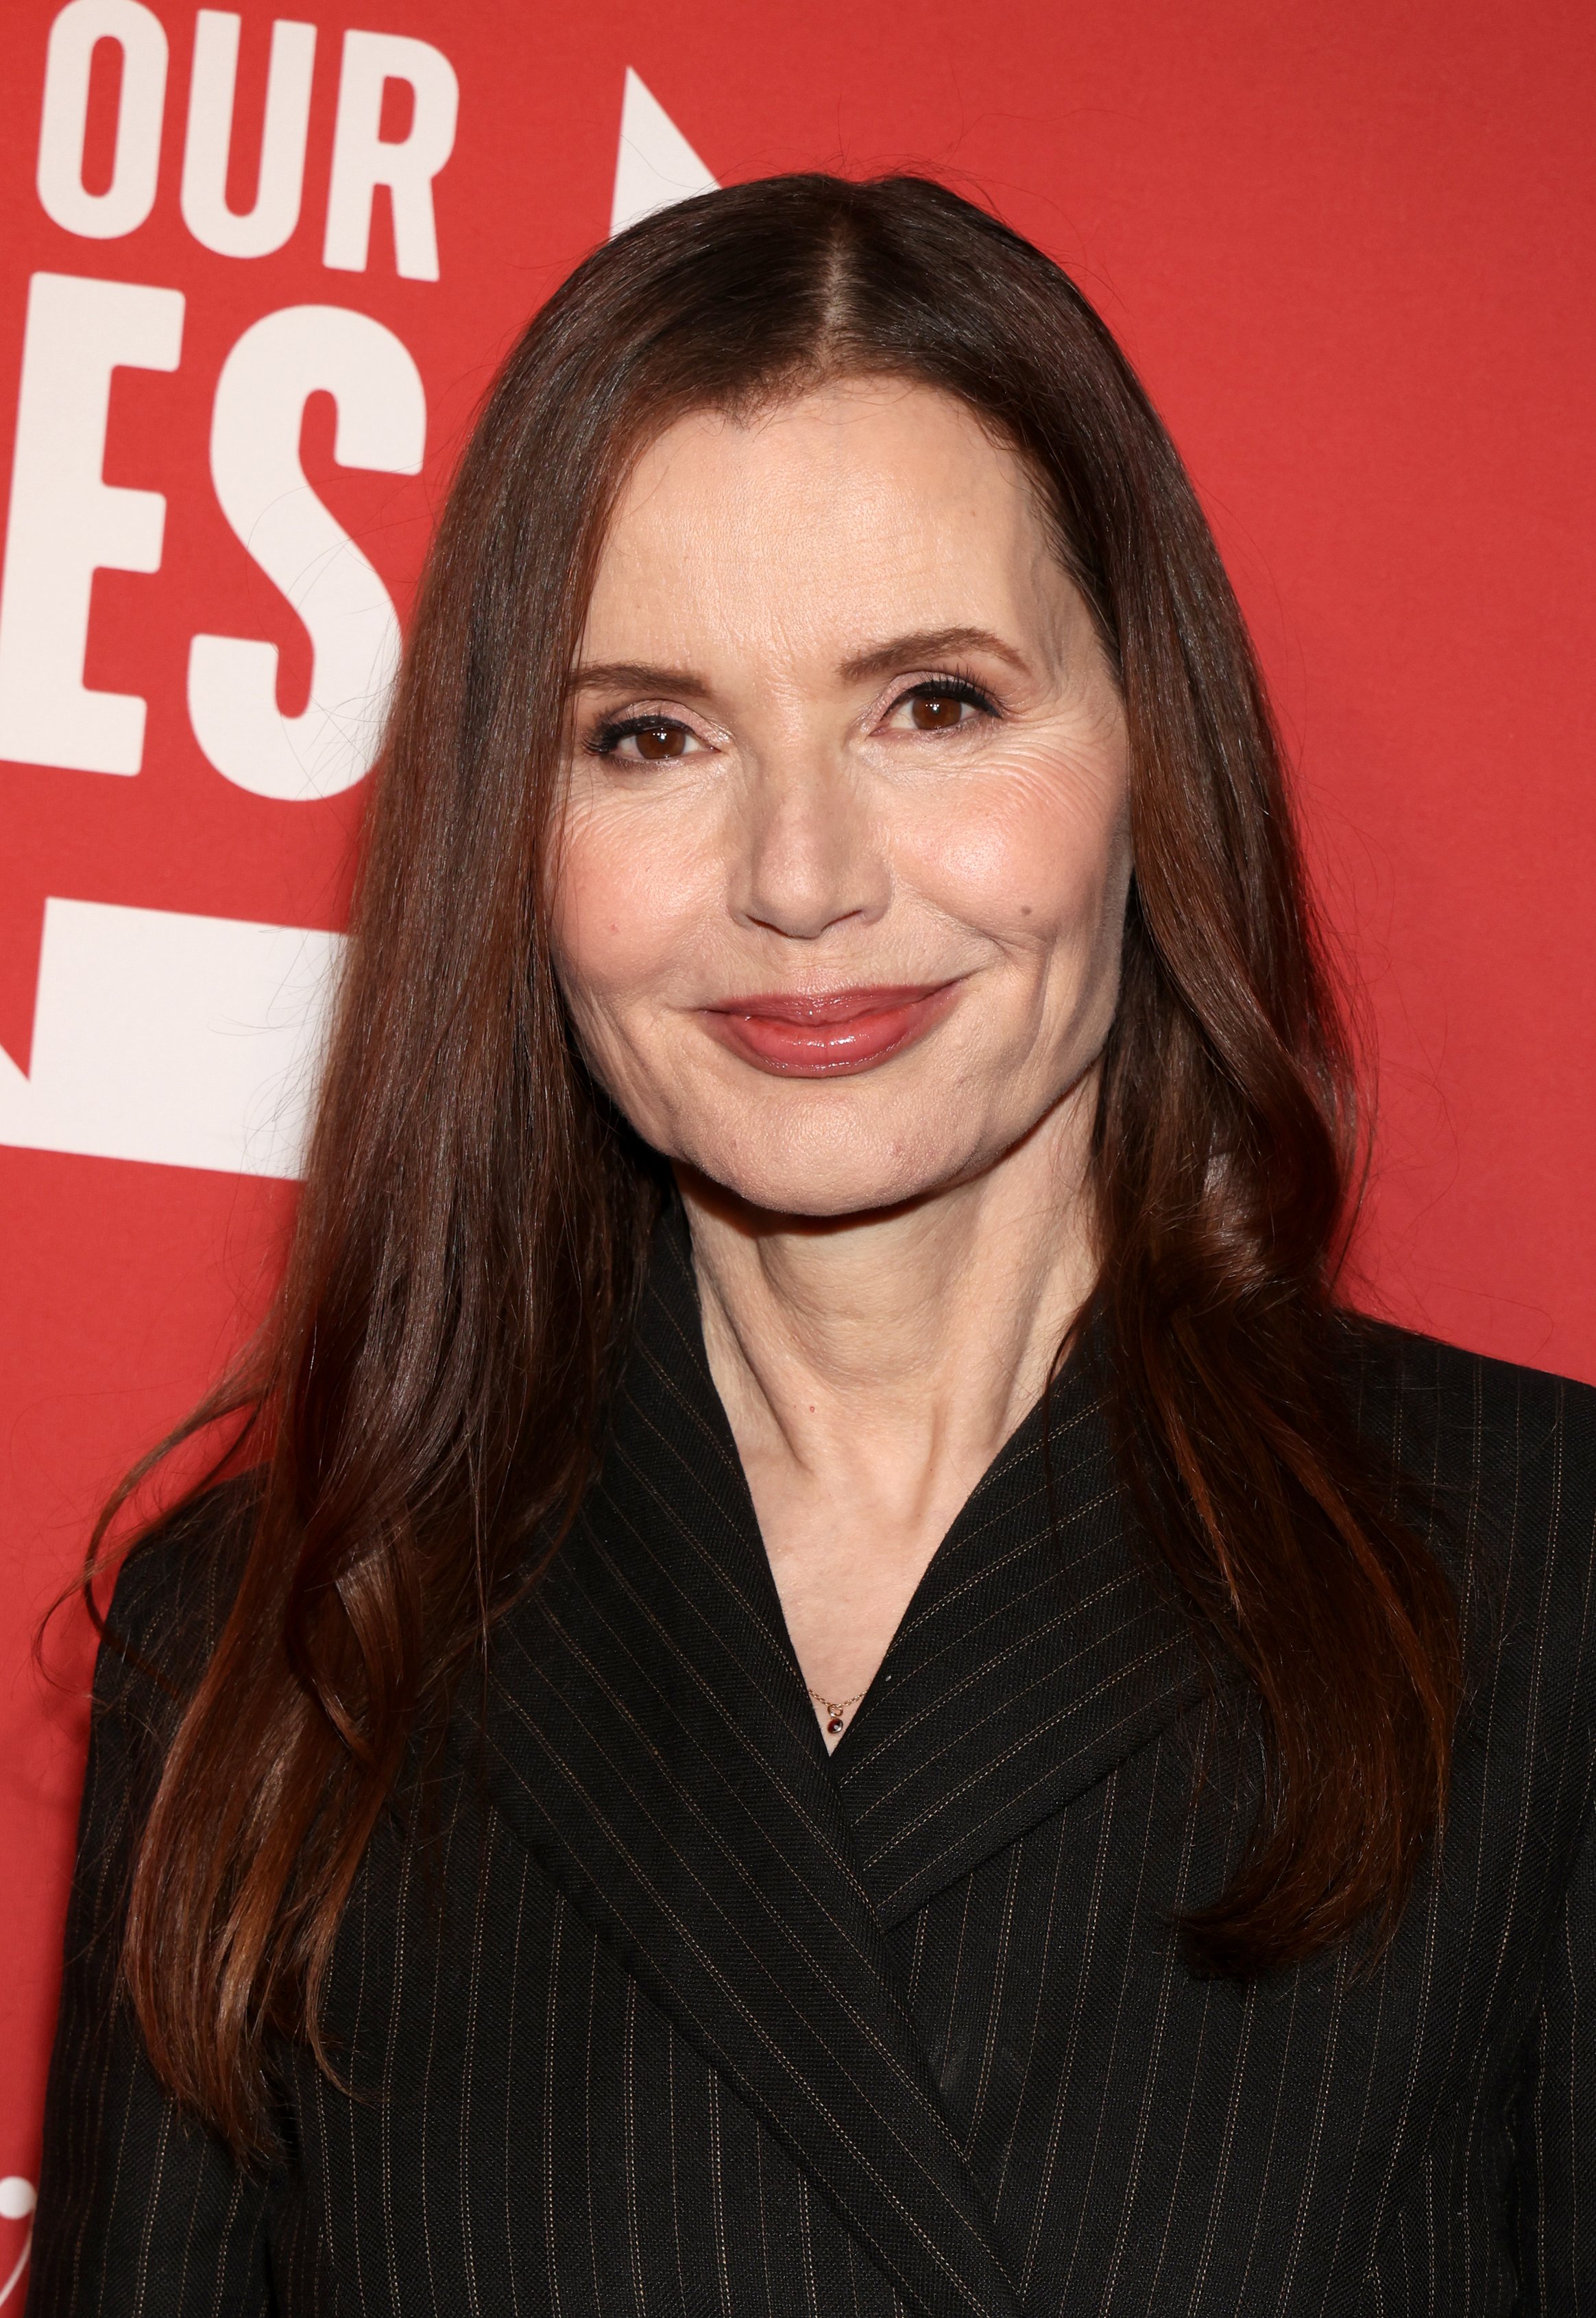 Geena Davis attending "Raising Our Voices: Setting Hollywood's Inclusion Agenda" Inaugural Luncheon at The Maybourne Beverly Hills on April 20, 2022 in Beverly Hills, California. / Source: Getty Images